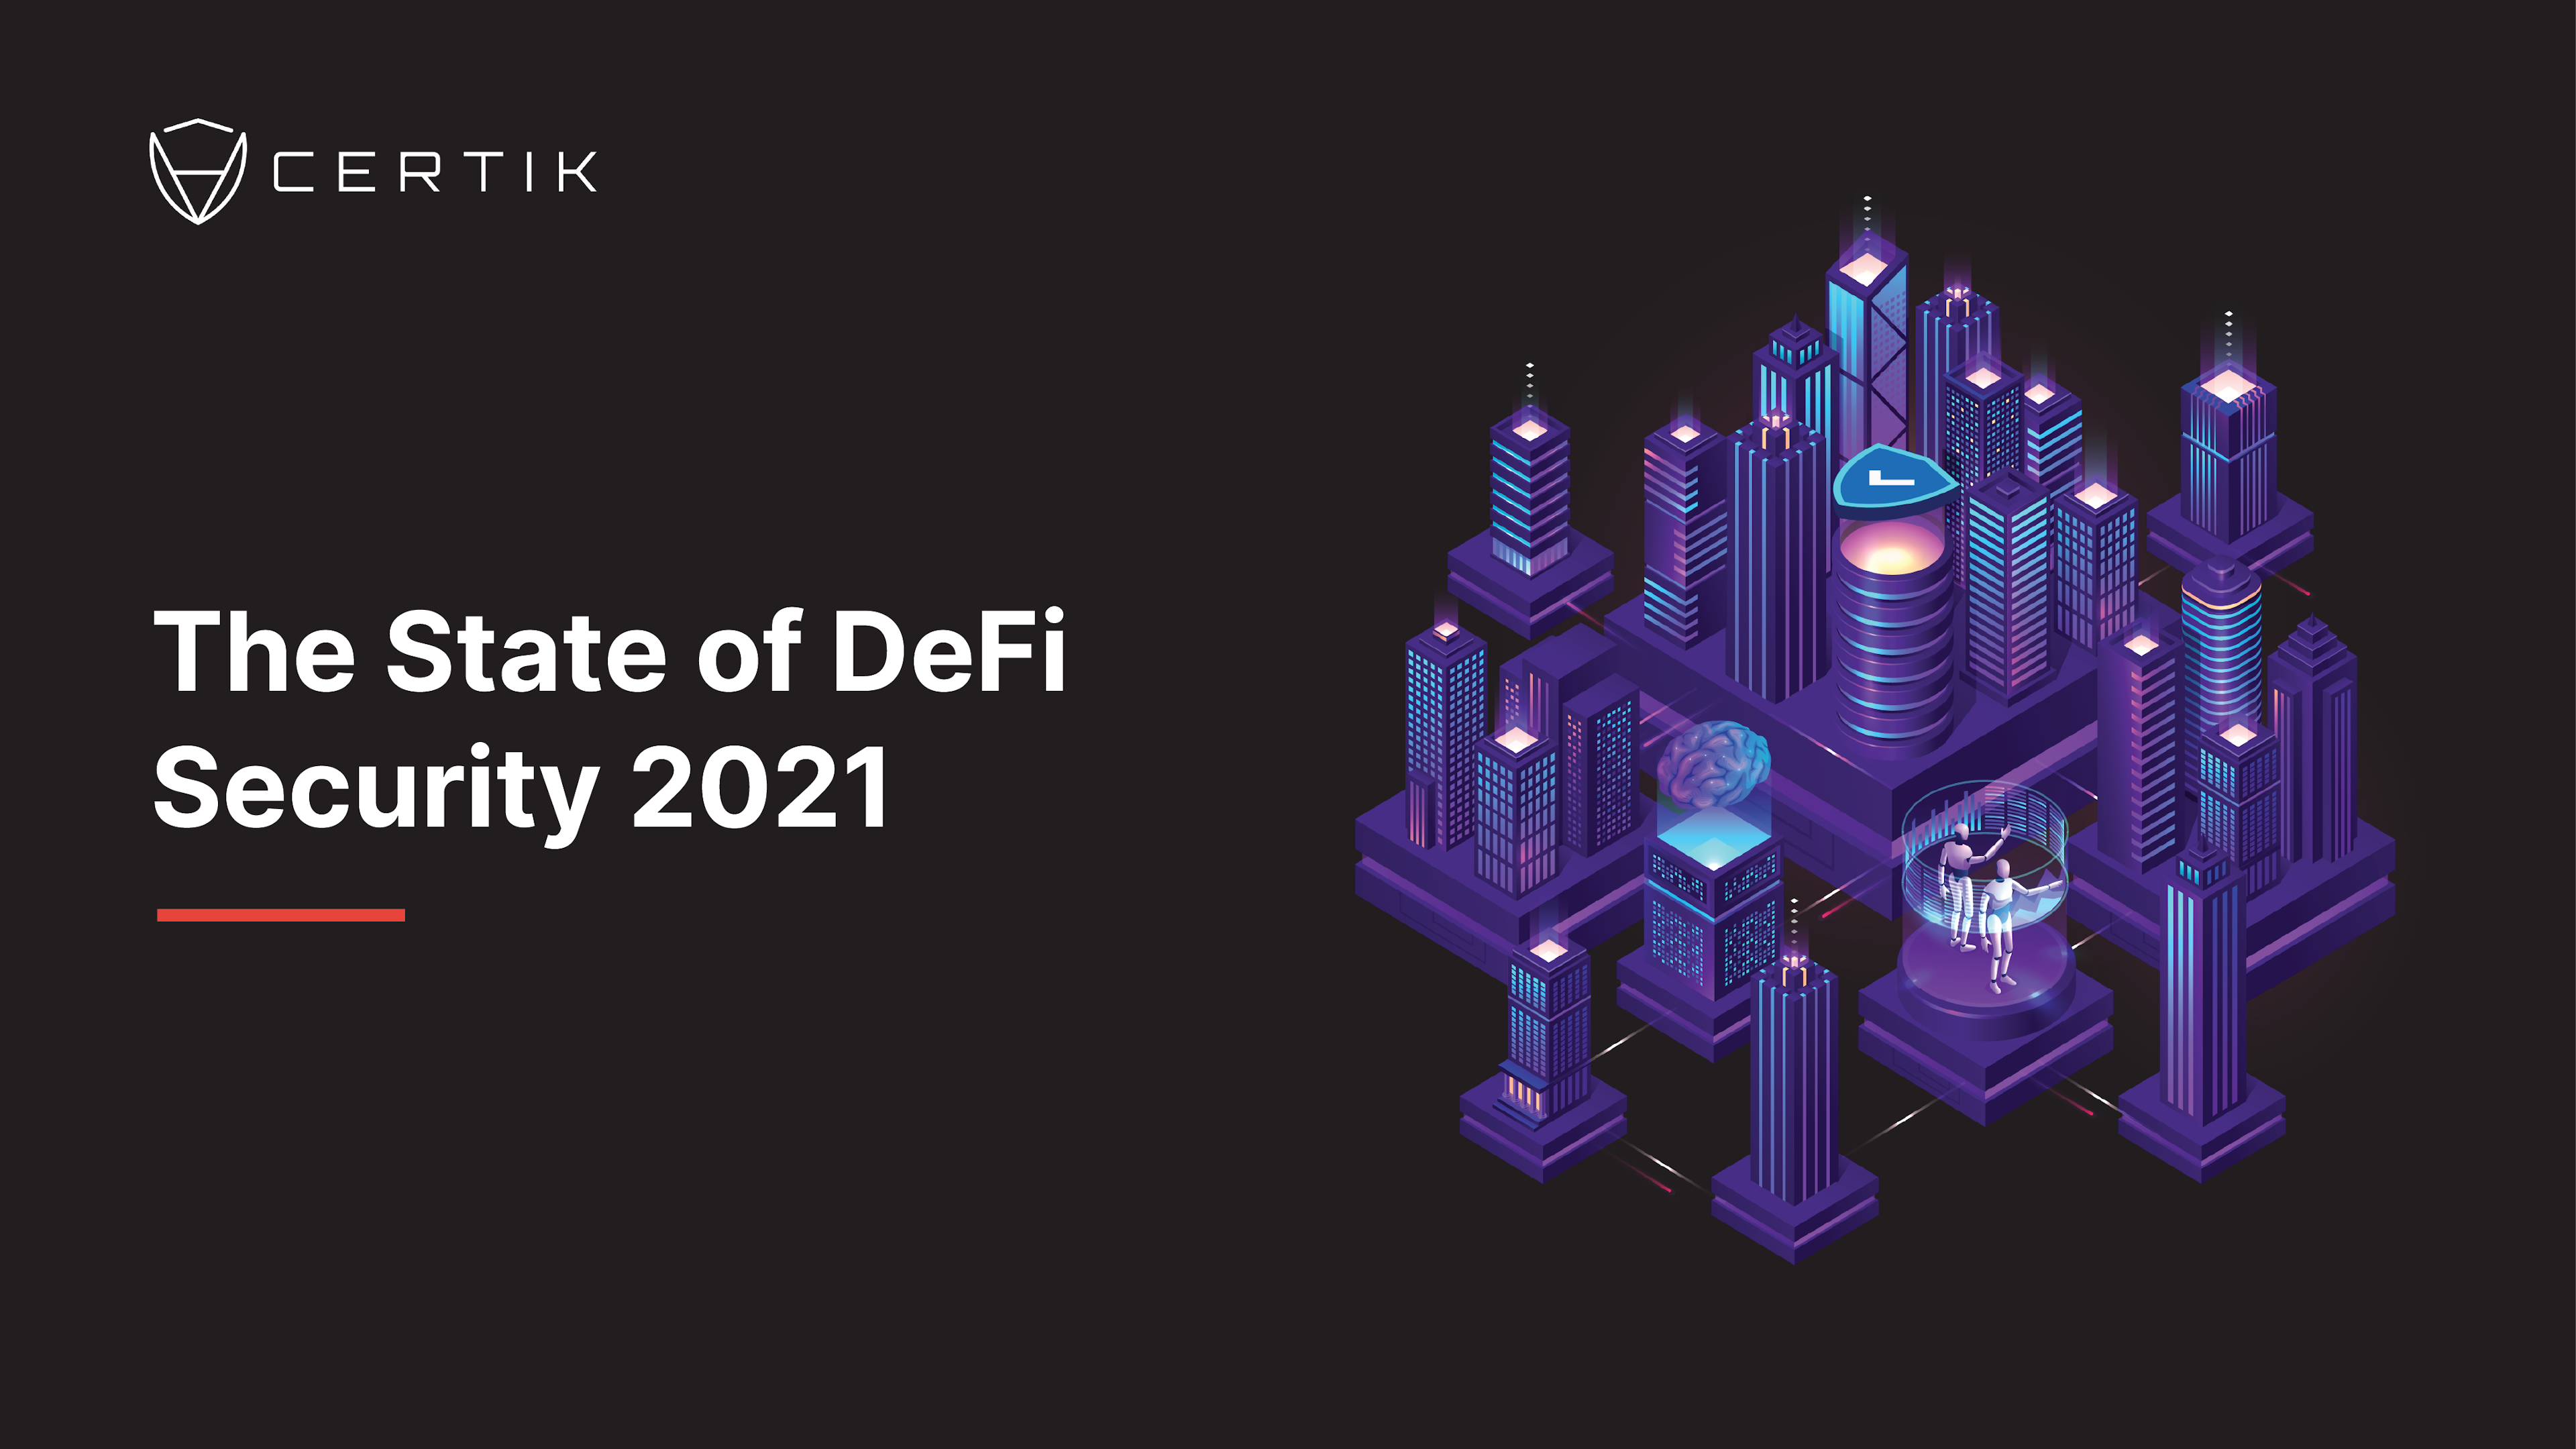 The State of DeFi Security 2021